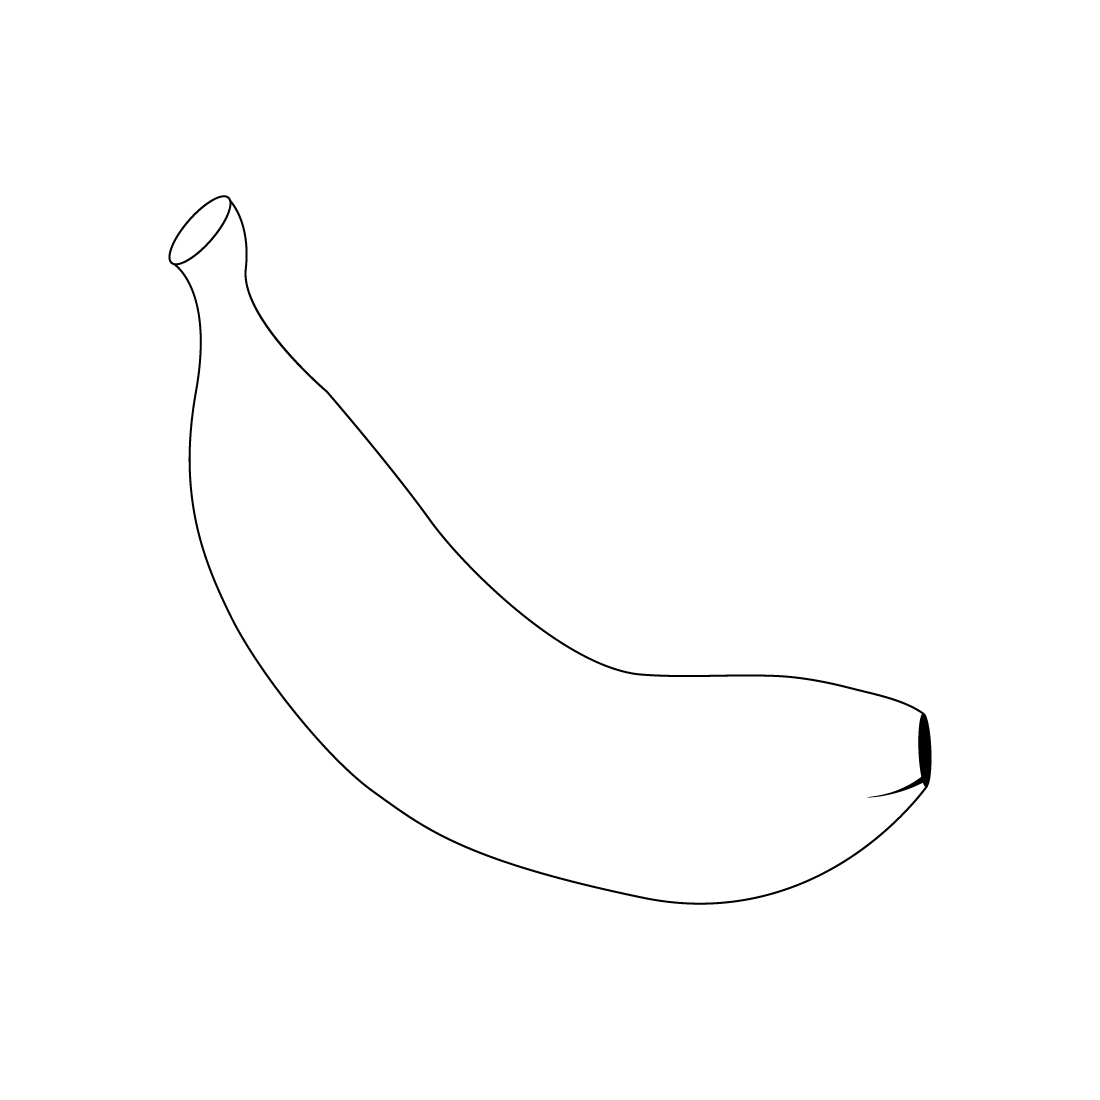 How to Draw a Banana - Easy Step-by-Step Guide